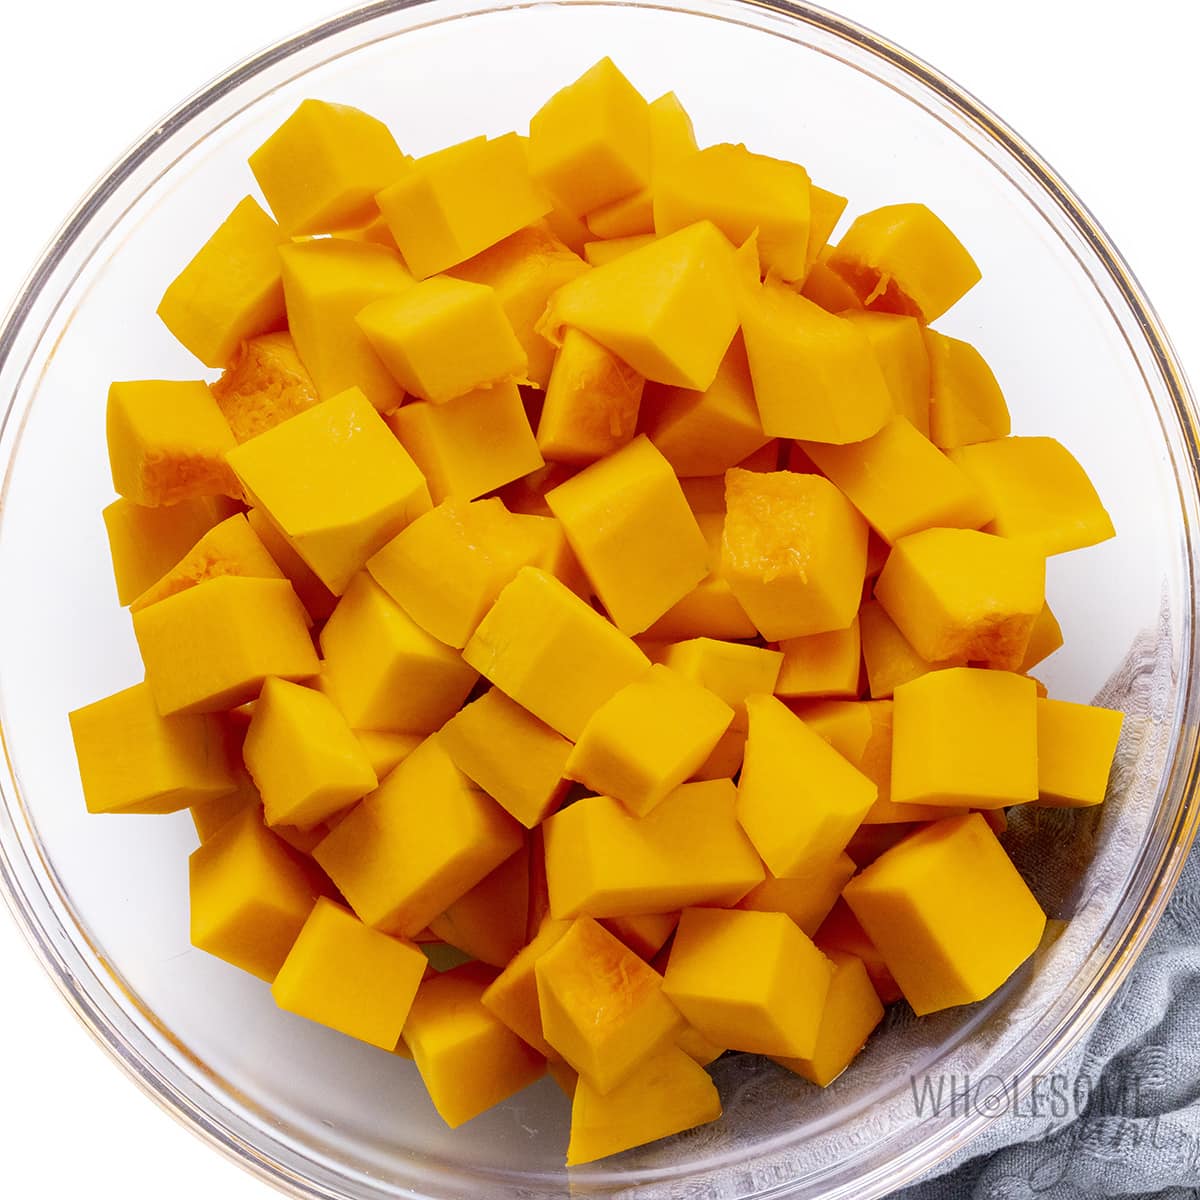 Cubes of squash in a bowl.